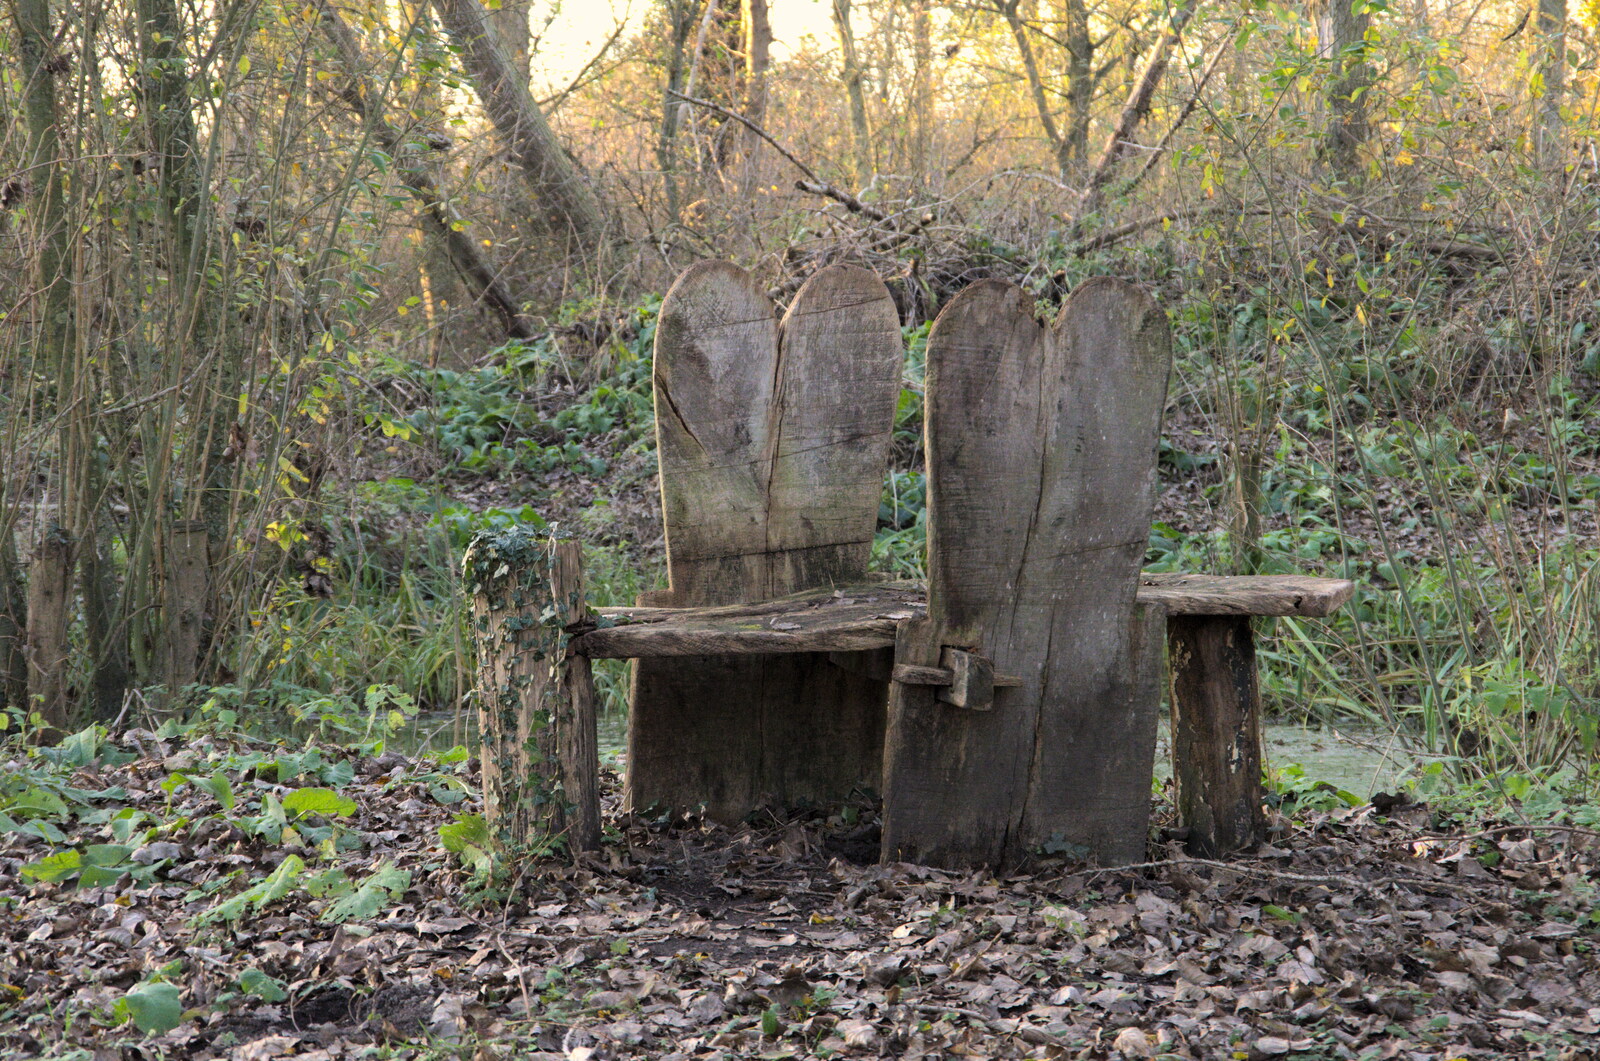 A curious wooden installation from The Dereliction of Eye, Suffolk - 22nd November 2020